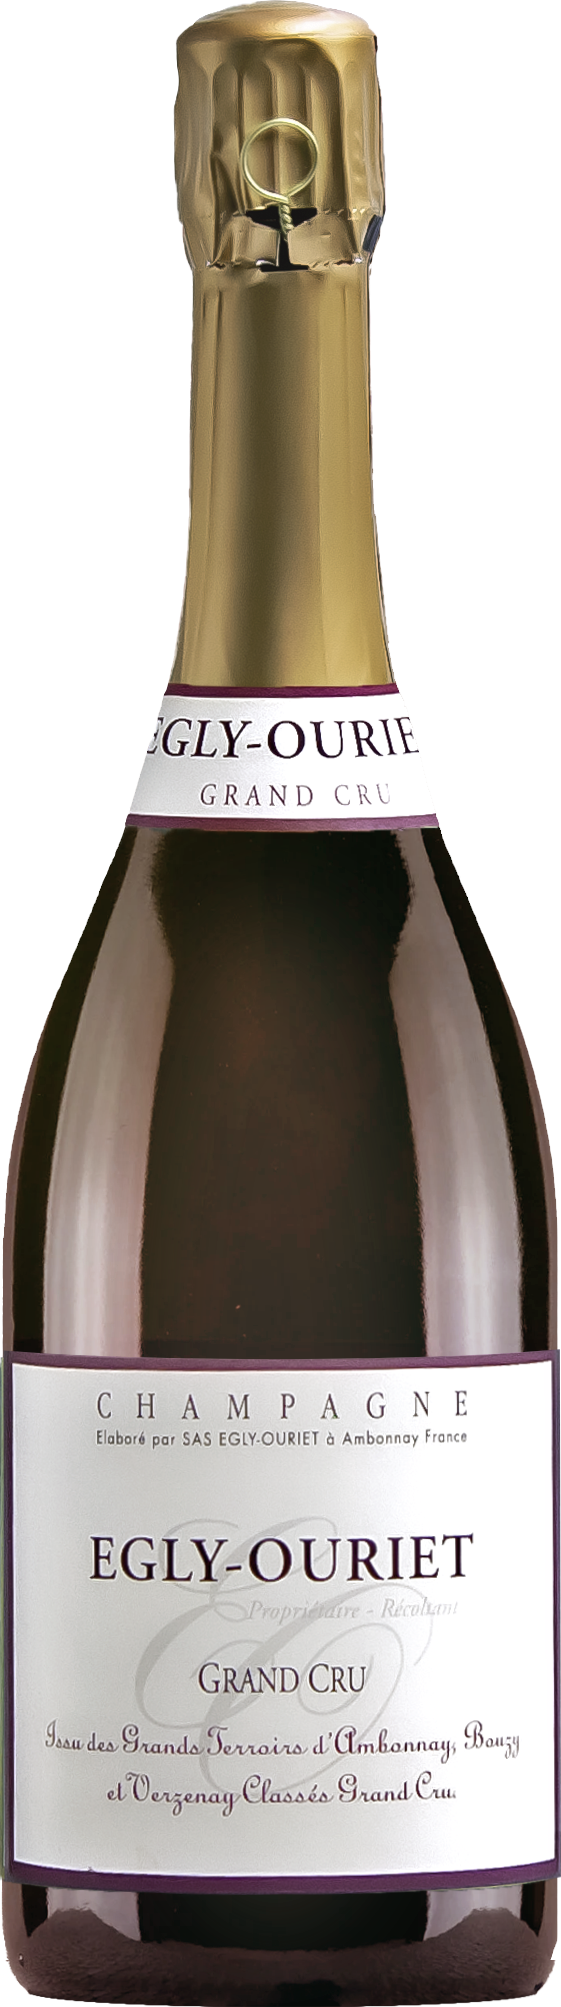 Champagne Egly-Ouriet Grand Cru Brut NV (base 15, disg Oct 2020)